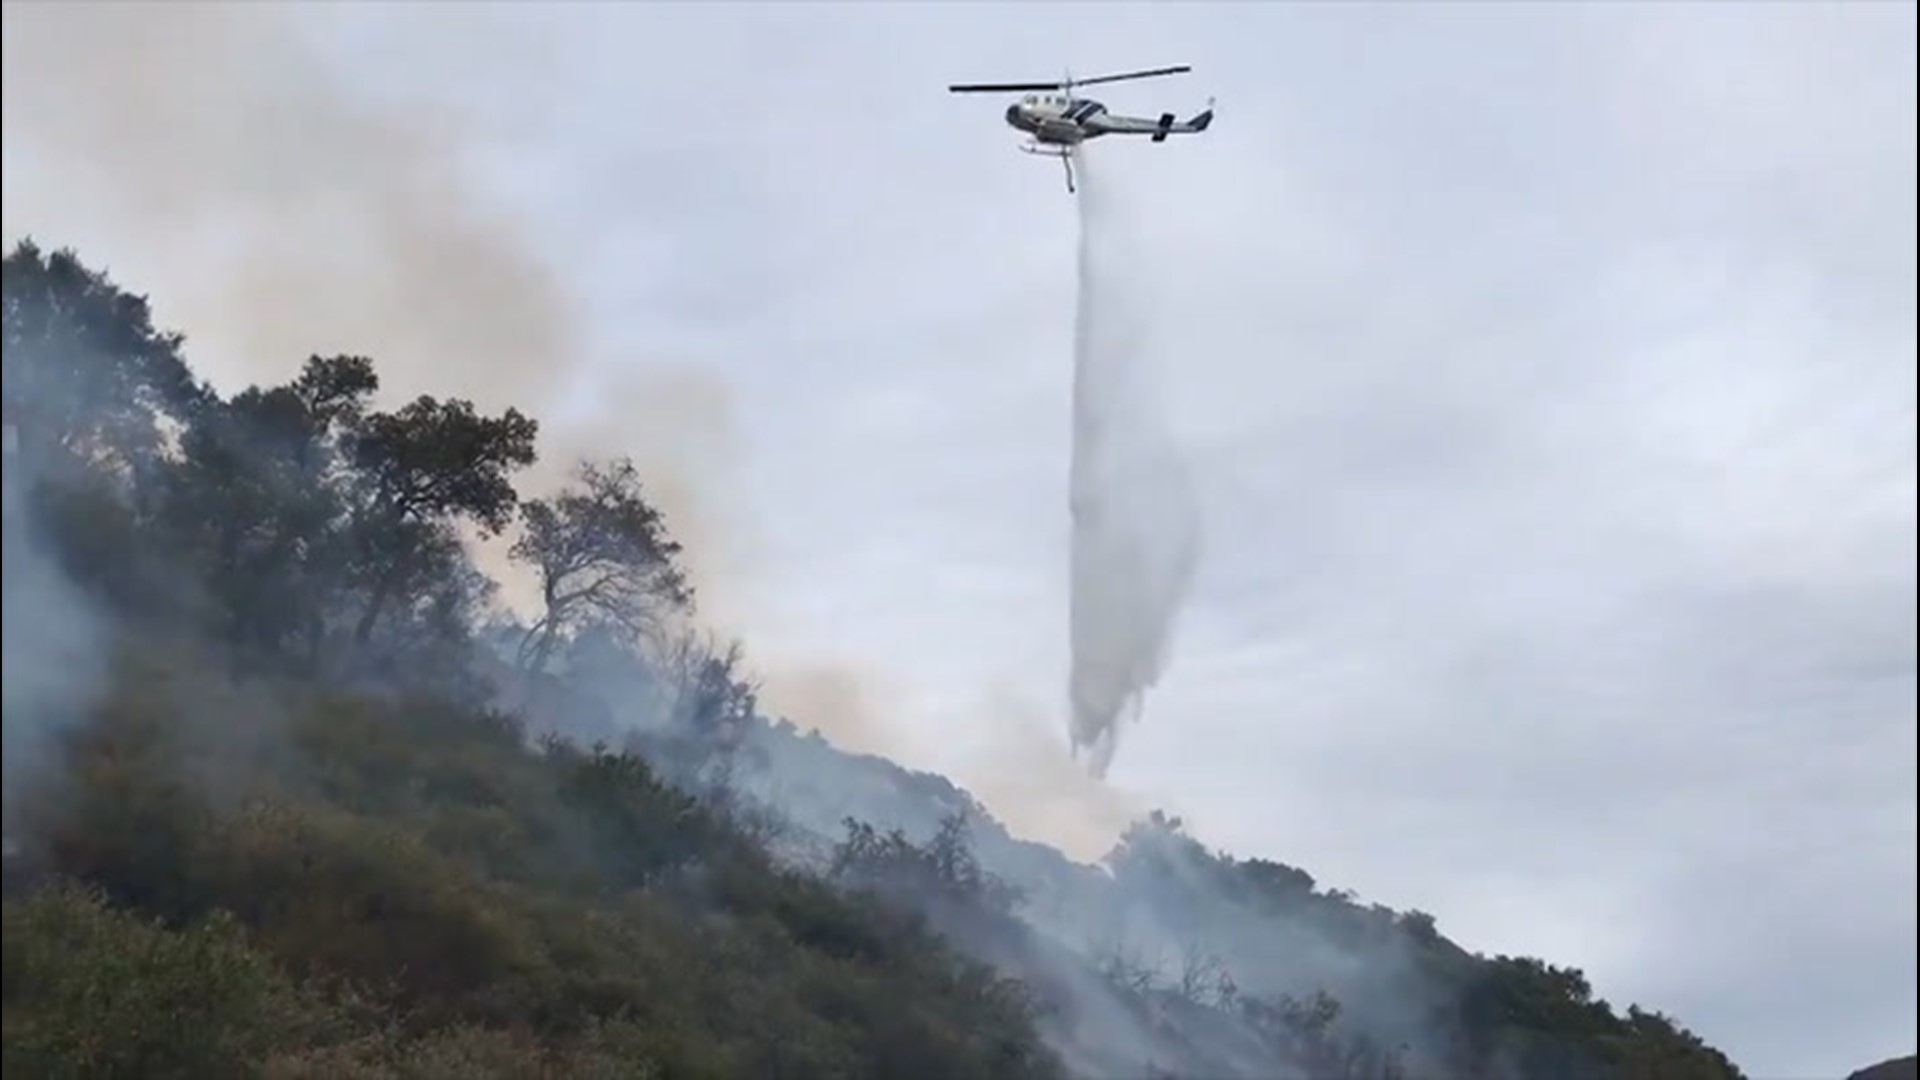 Firefighting crews in Santa Barbara, California, used helicopters to help battle a small wildfire on March 9. Forward progress of the fire was quickly stopped.